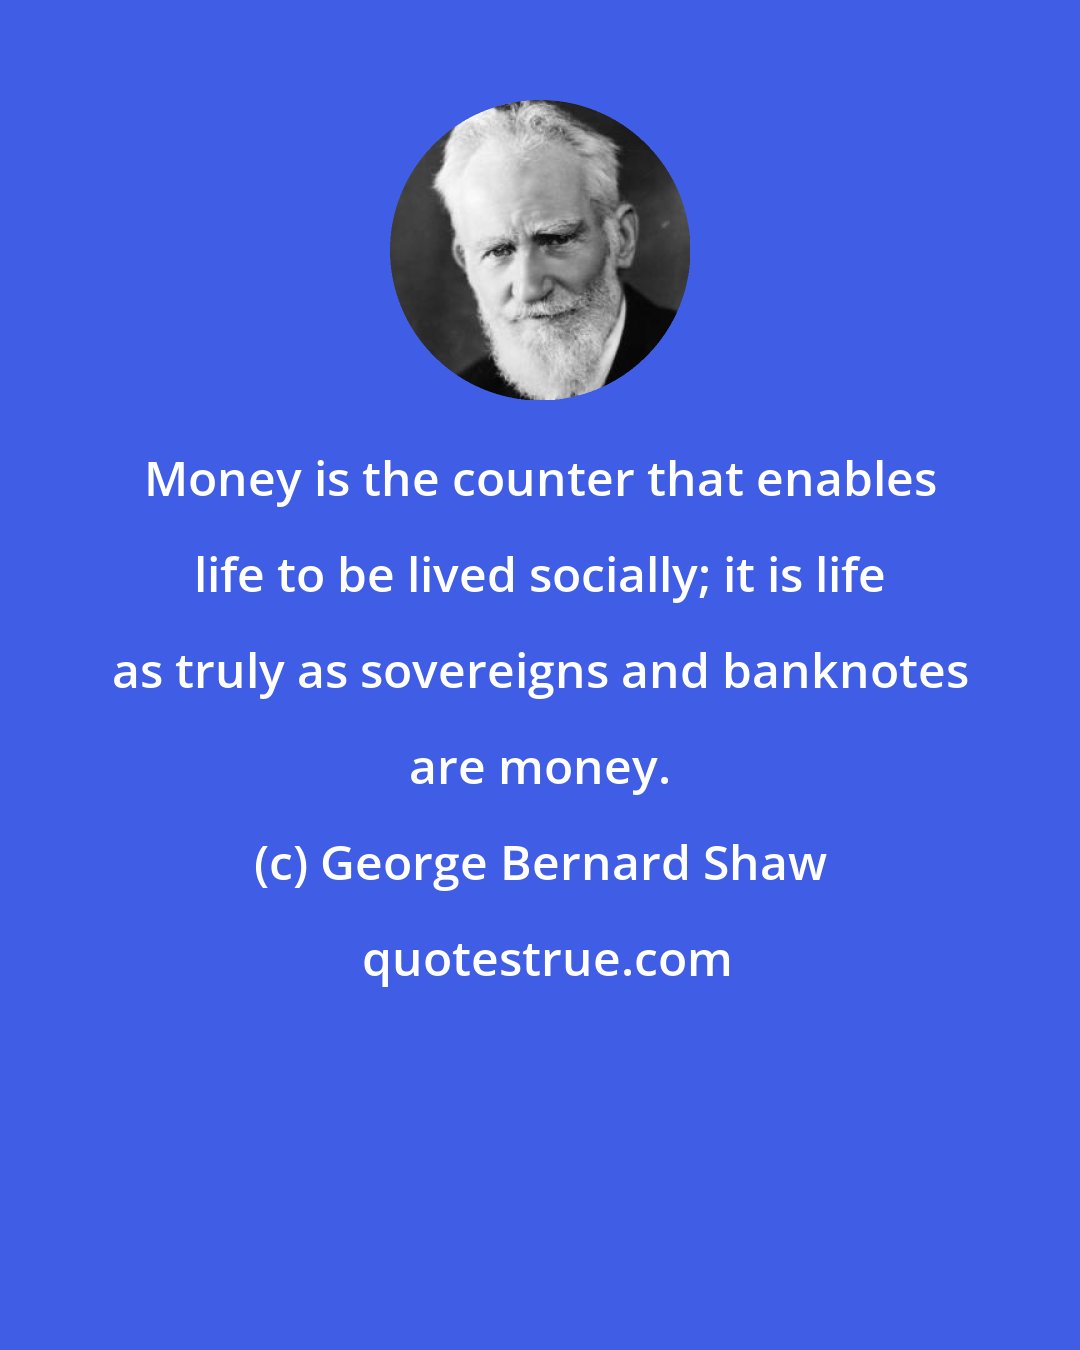 George Bernard Shaw: Money is the counter that enables life to be lived socially; it is life as truly as sovereigns and banknotes are money.